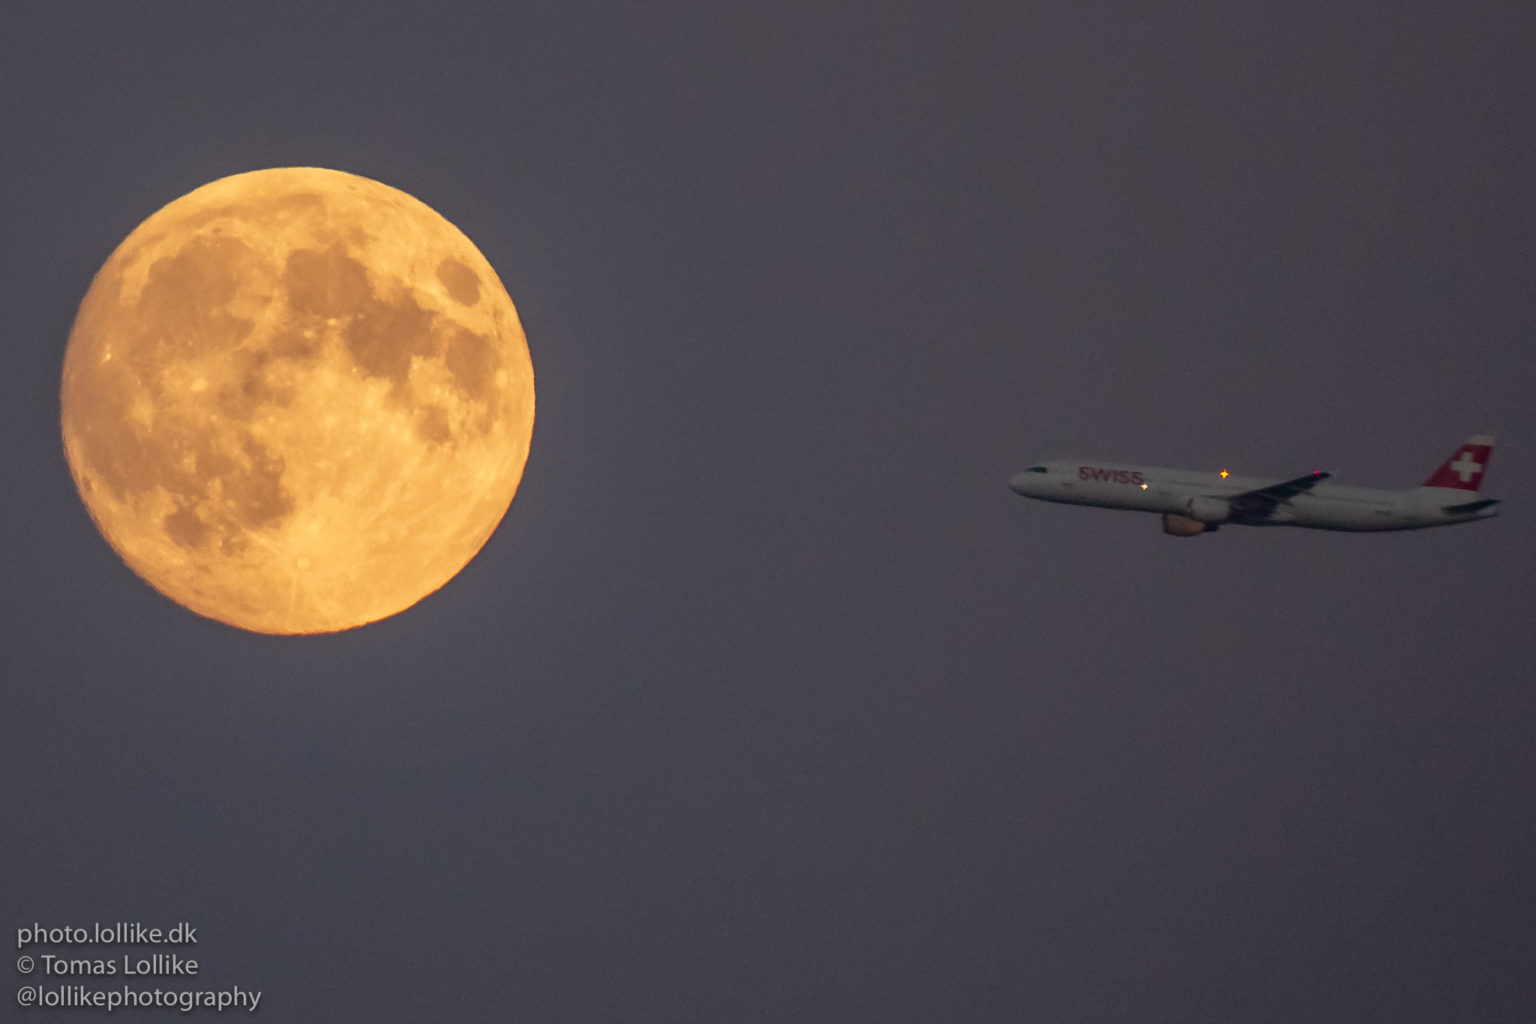 SWISS (HB-IOL) passing the moon shortly after take-off from Copenhagen to Zurich in an Airbus A321 on route LX1273